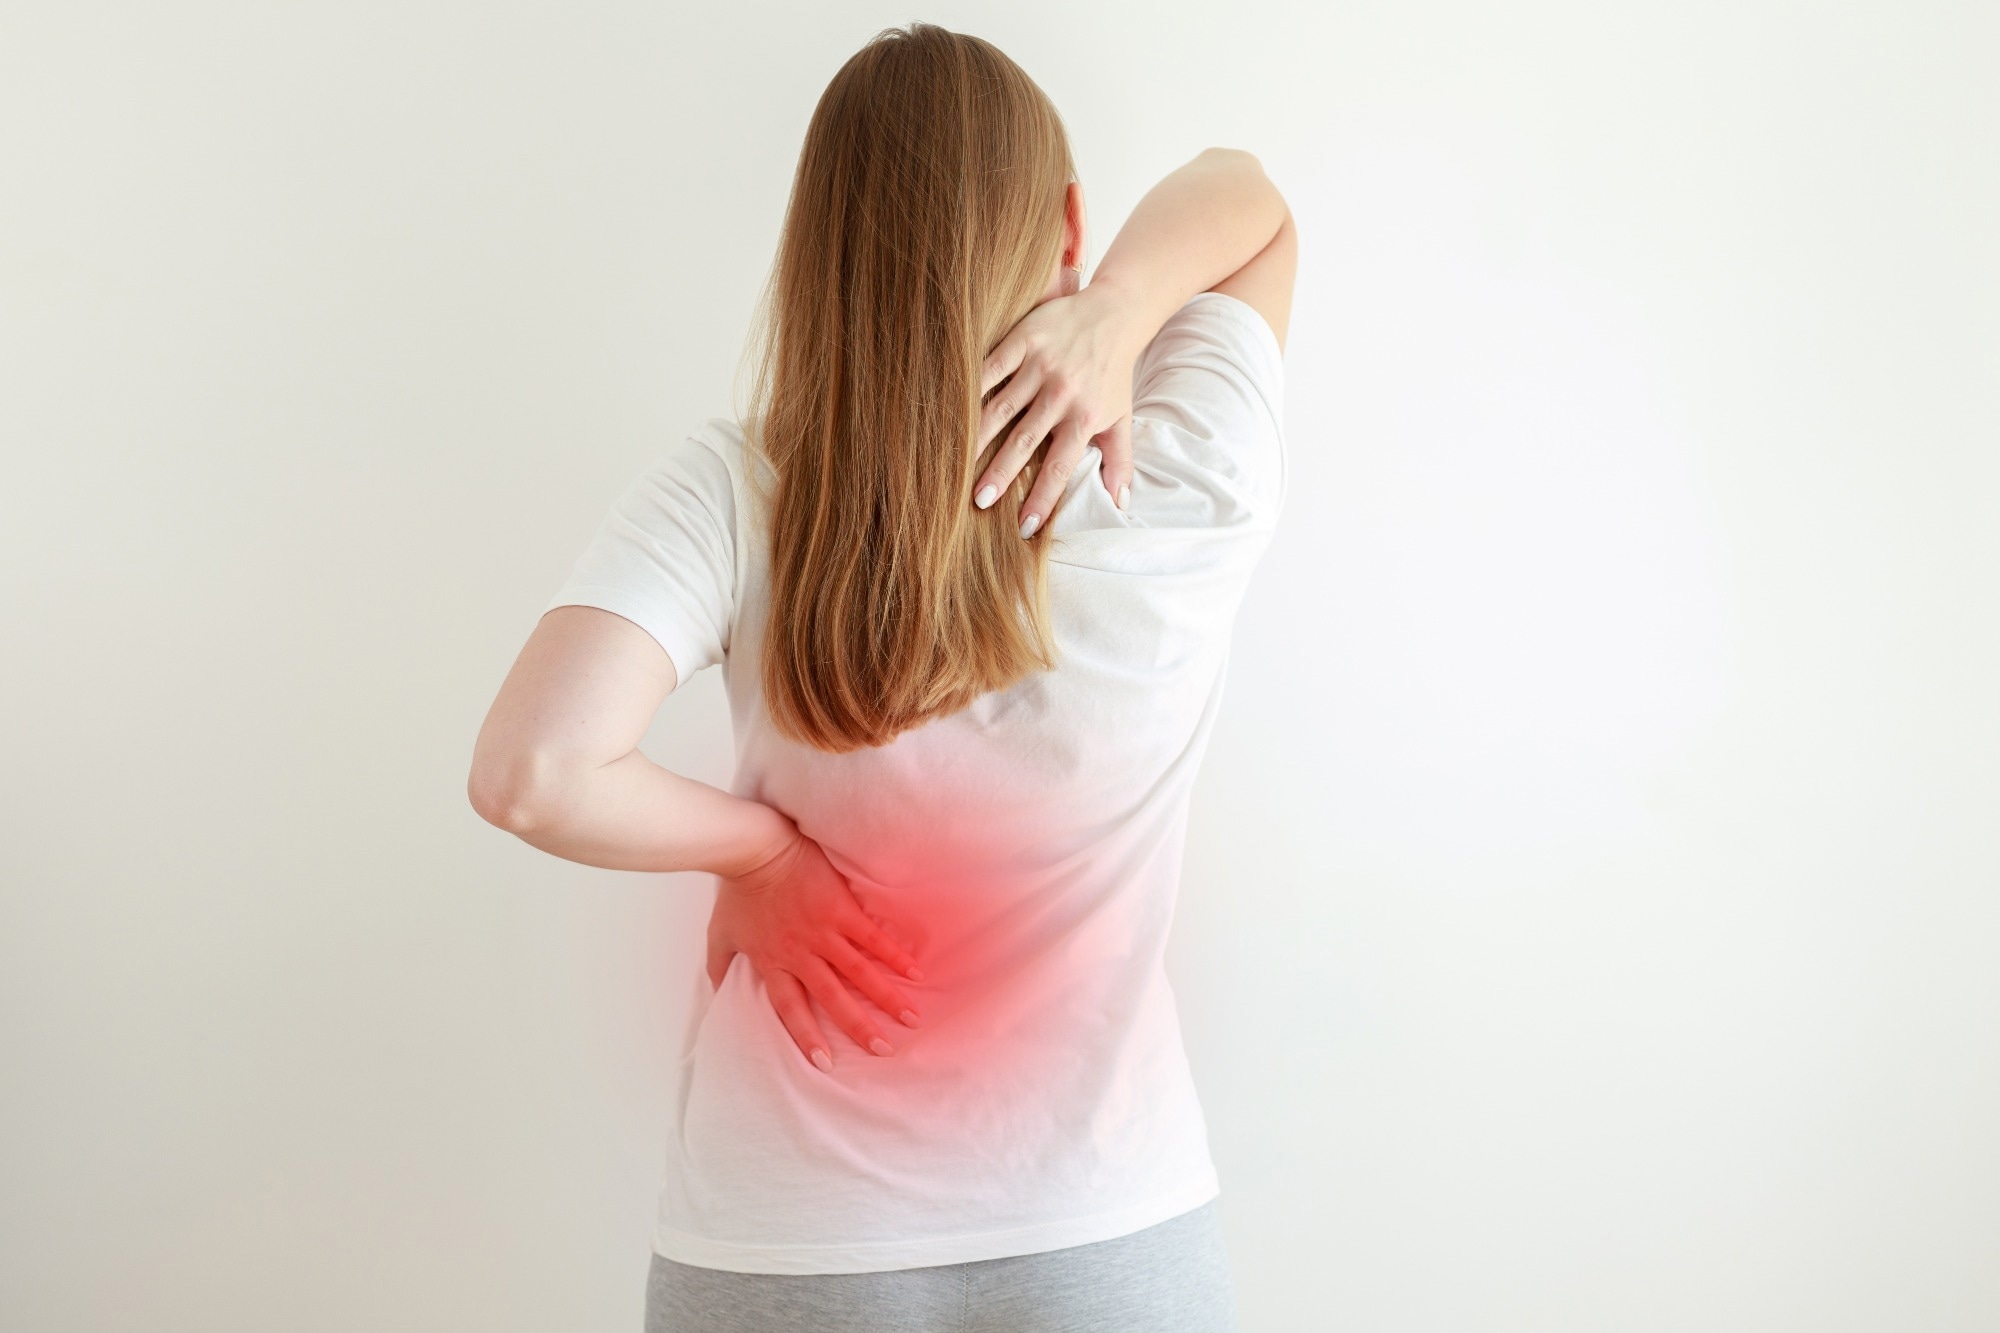 tudy:  Association between different composite dietary antioxidant indexes and low back pain in American women adults: a cross-sectional study from NHANES. Image Credit: Kateryna Artsybasheva / Shutterstock.com